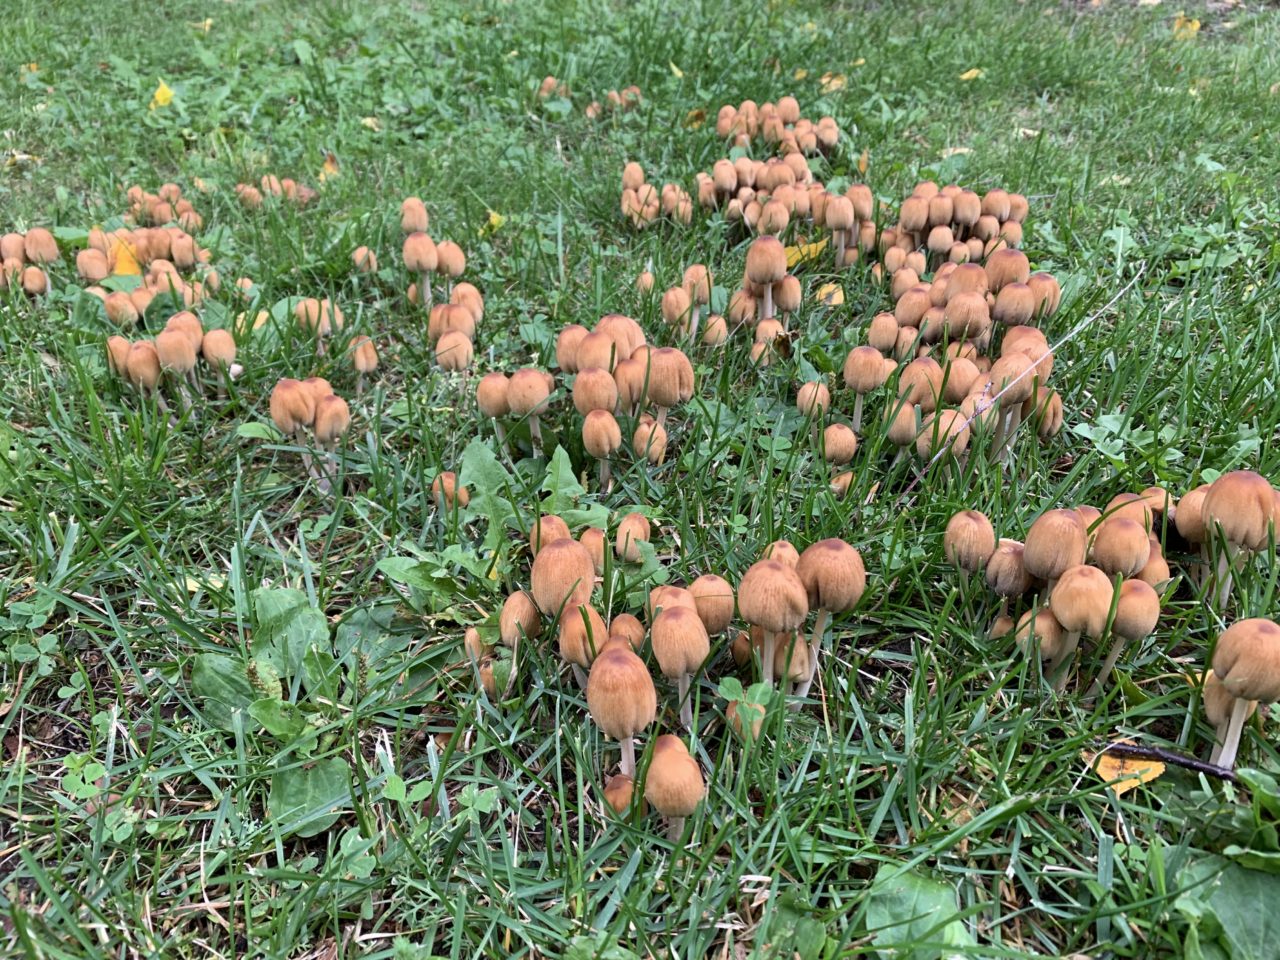 Small Brown Mushrooms In The Grass